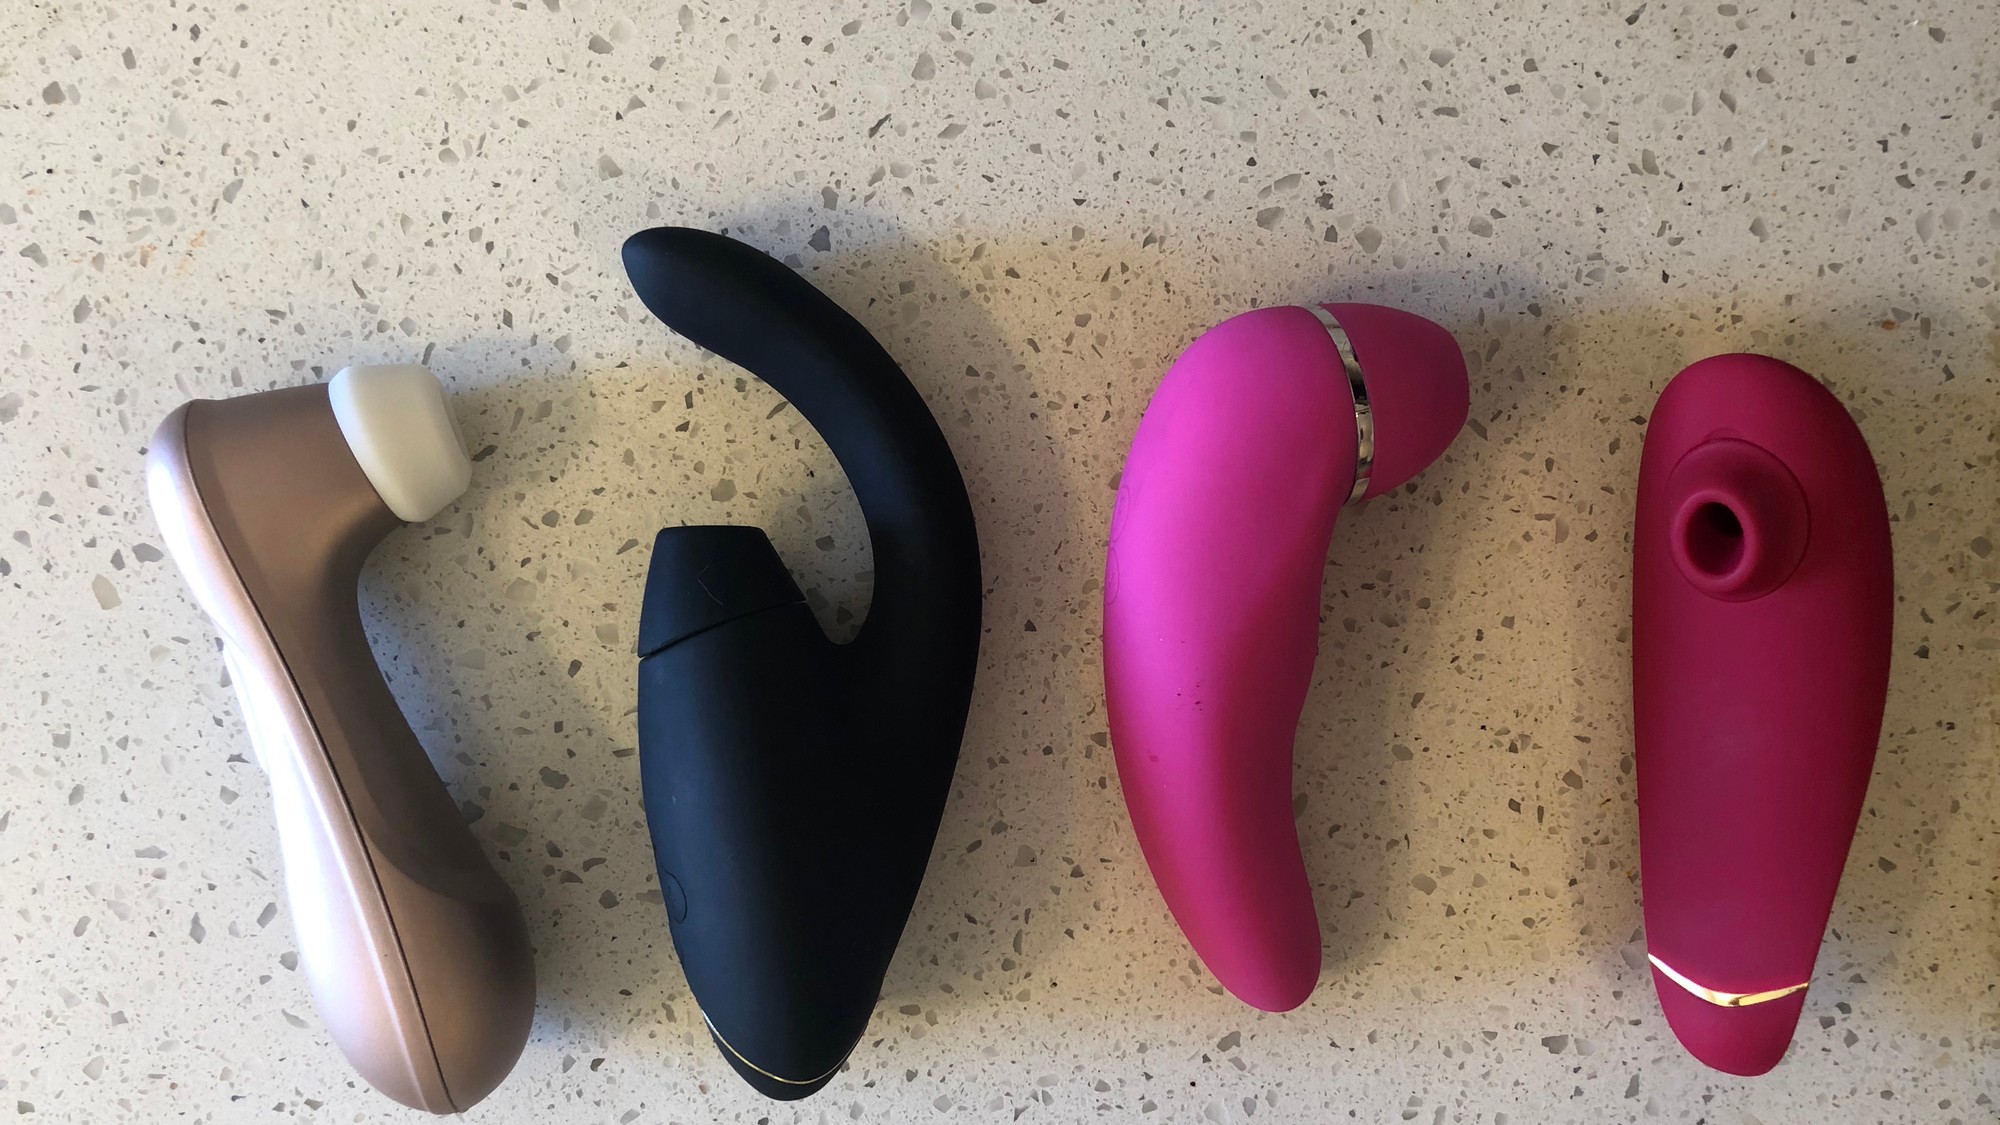 Painful Toys - I Tried to Replace Men with 'Clit Sucking' Sex Toys - VICE